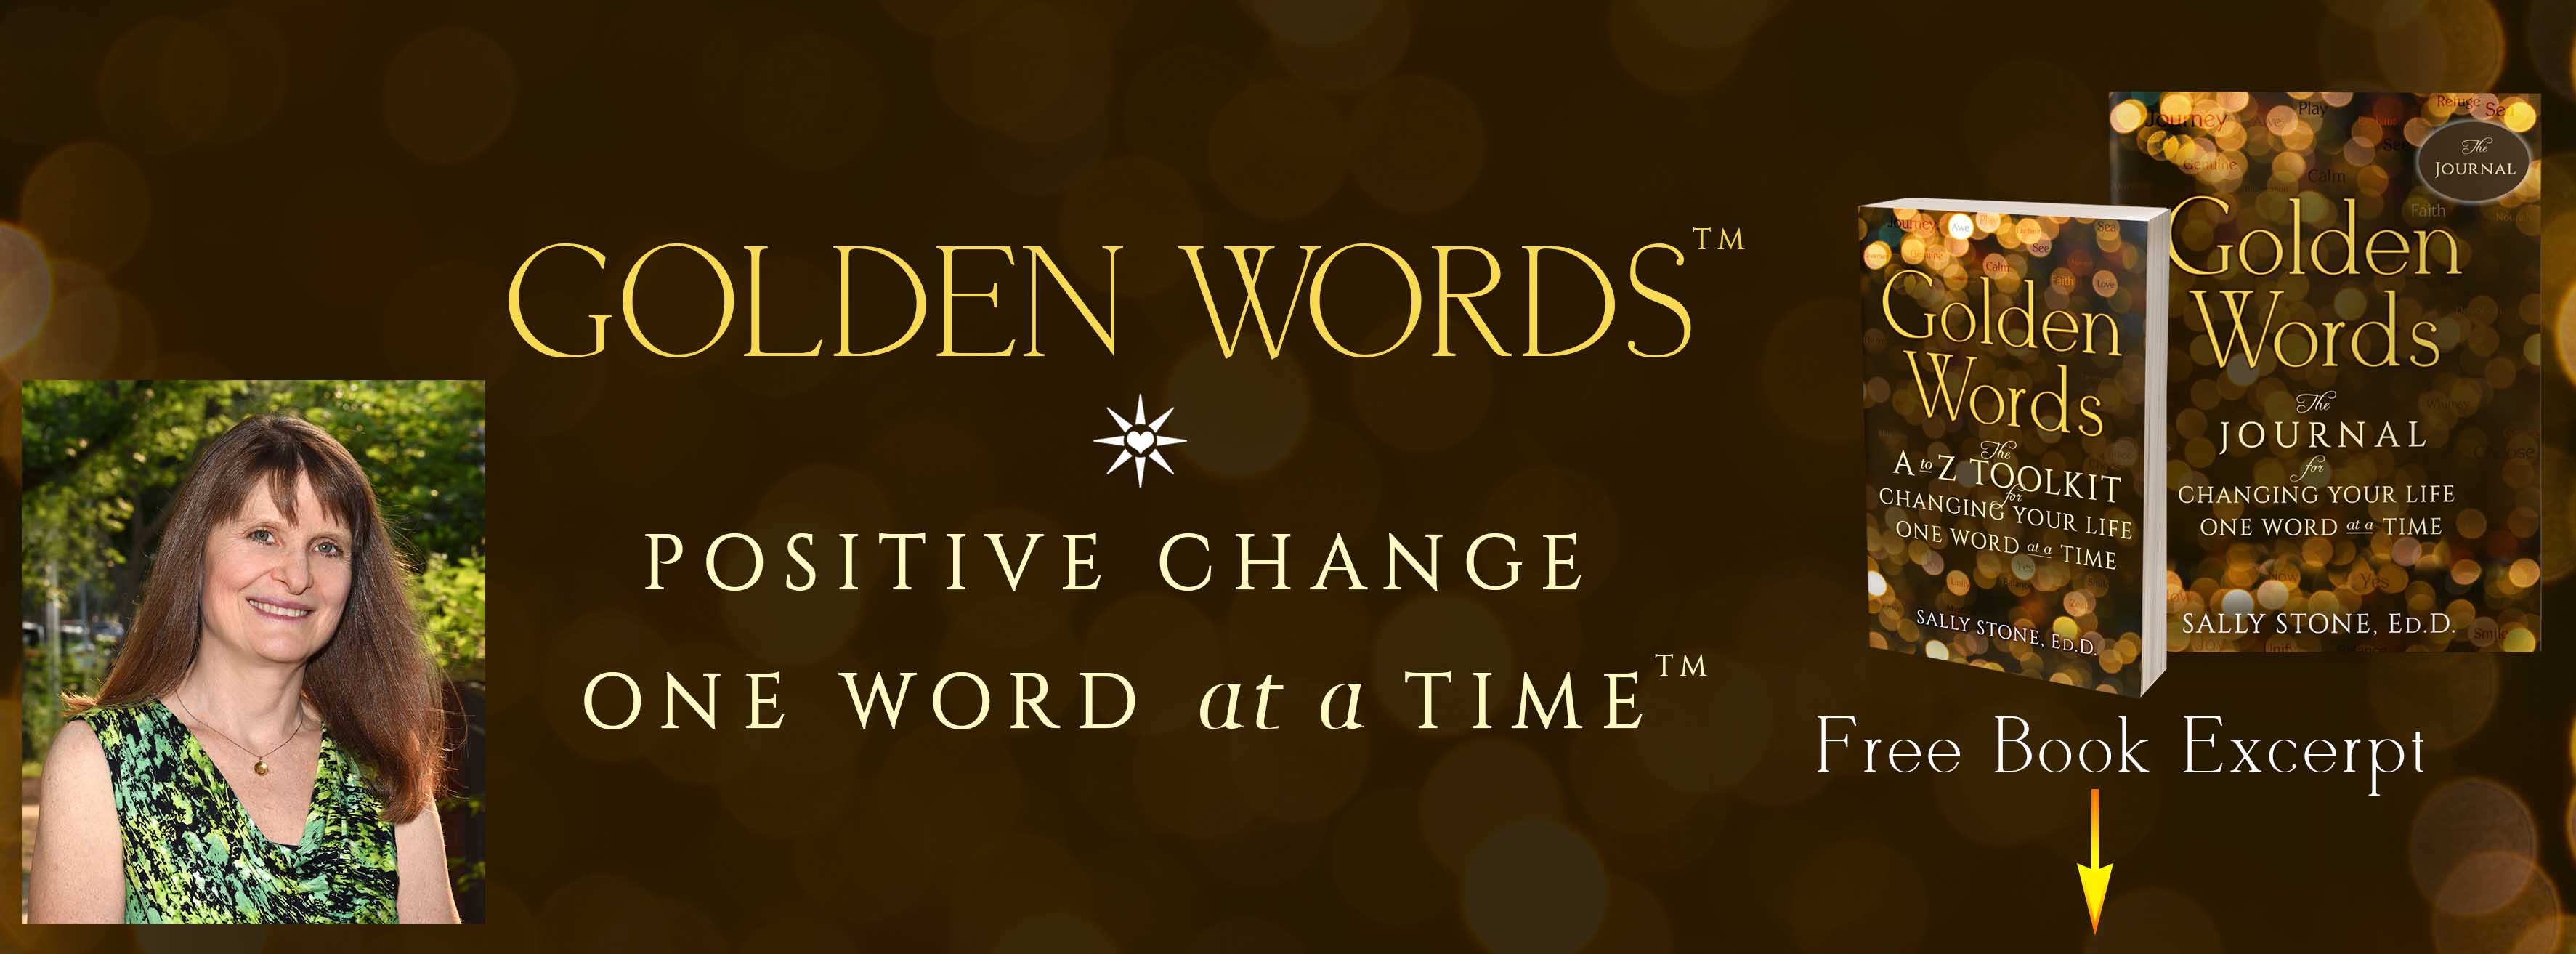 Golden-Words-Positive-Change-One-Word-At-A-Time